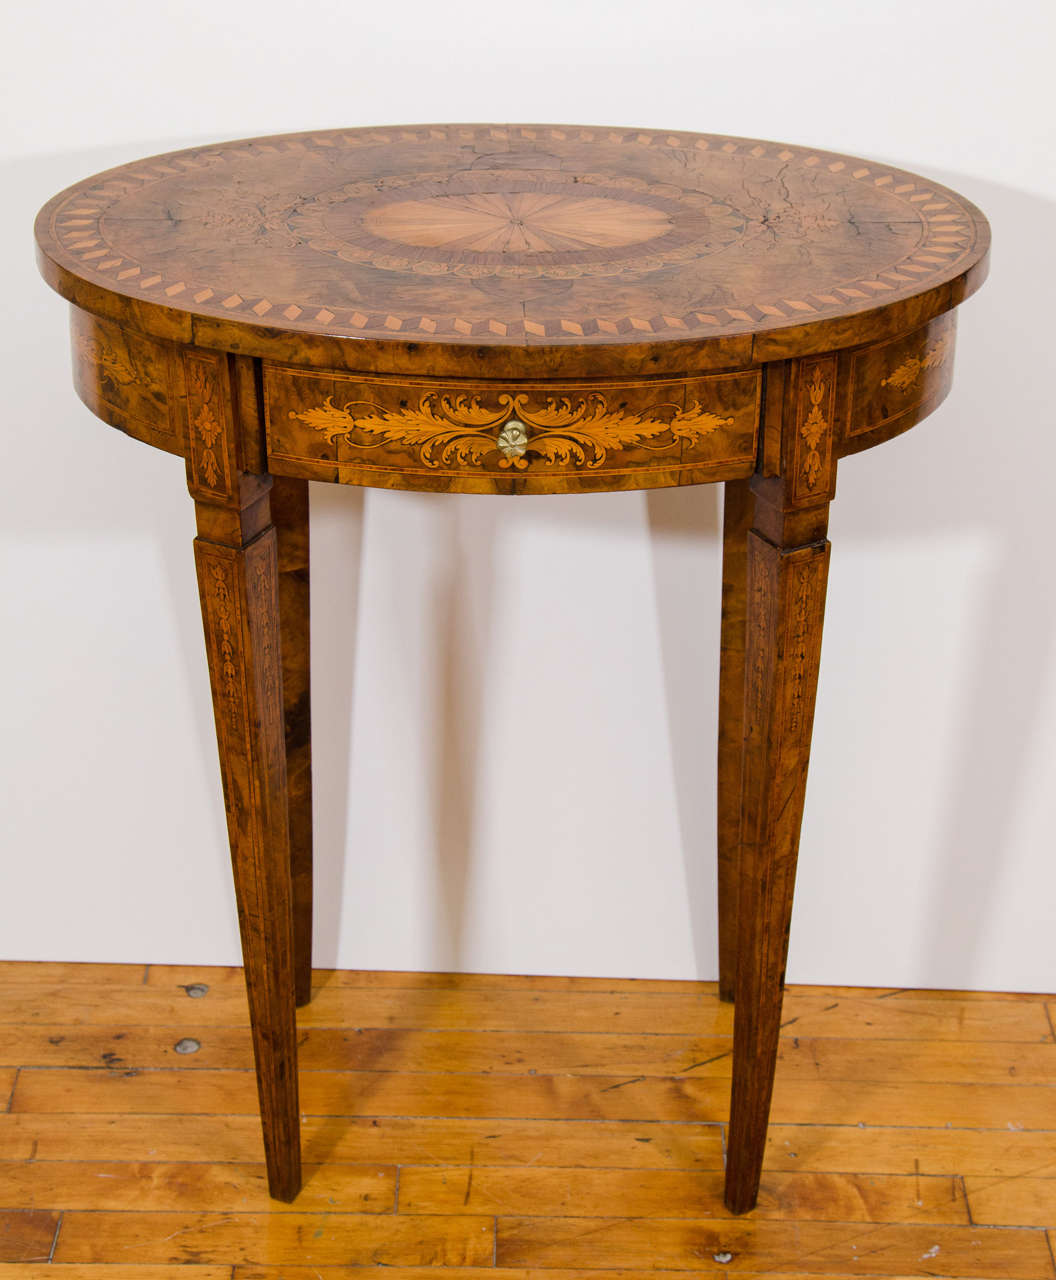 An exquisite early 19th century marquetry inlaid English side or center table.

Good condition with age appropriate wear.  Some cracks to the top.